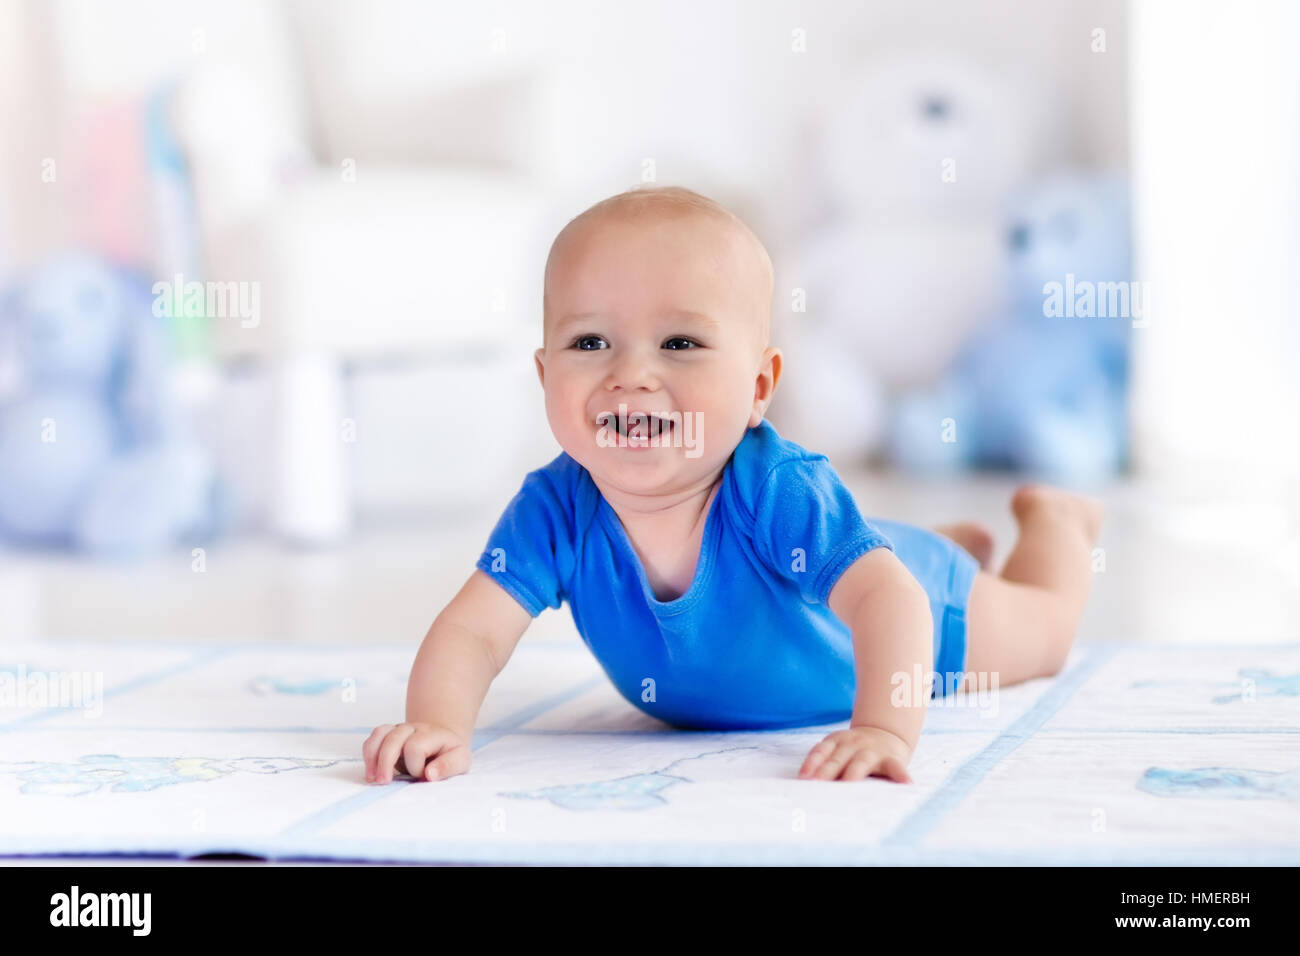 Cute baby boy on colorful playmat and gym, playing with hanging rattle toys. Kids activity and play center for early development Stock Photo